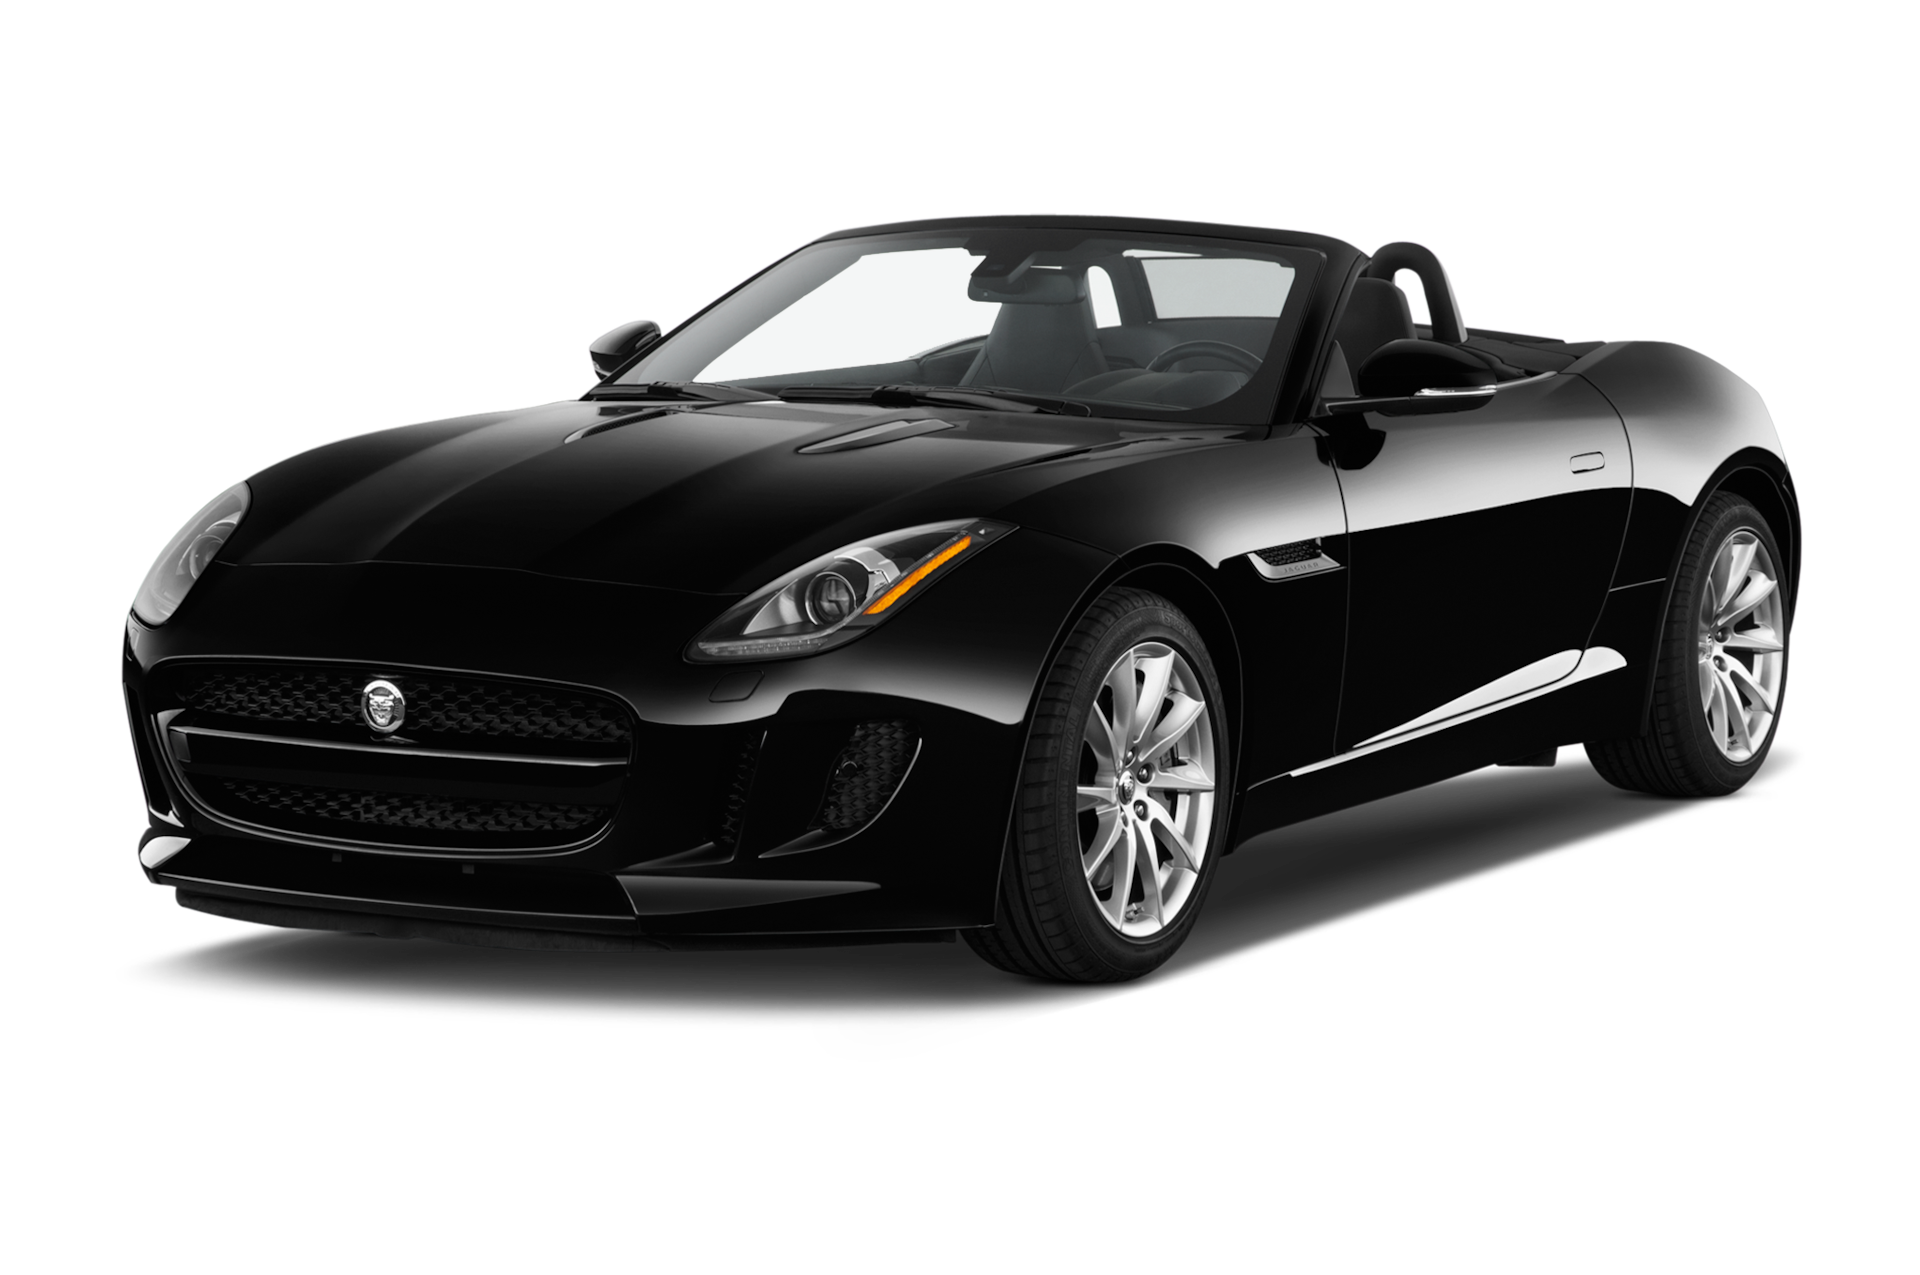 2016 Jaguar F-Type Prices, Reviews, and Photos - MotorTrend